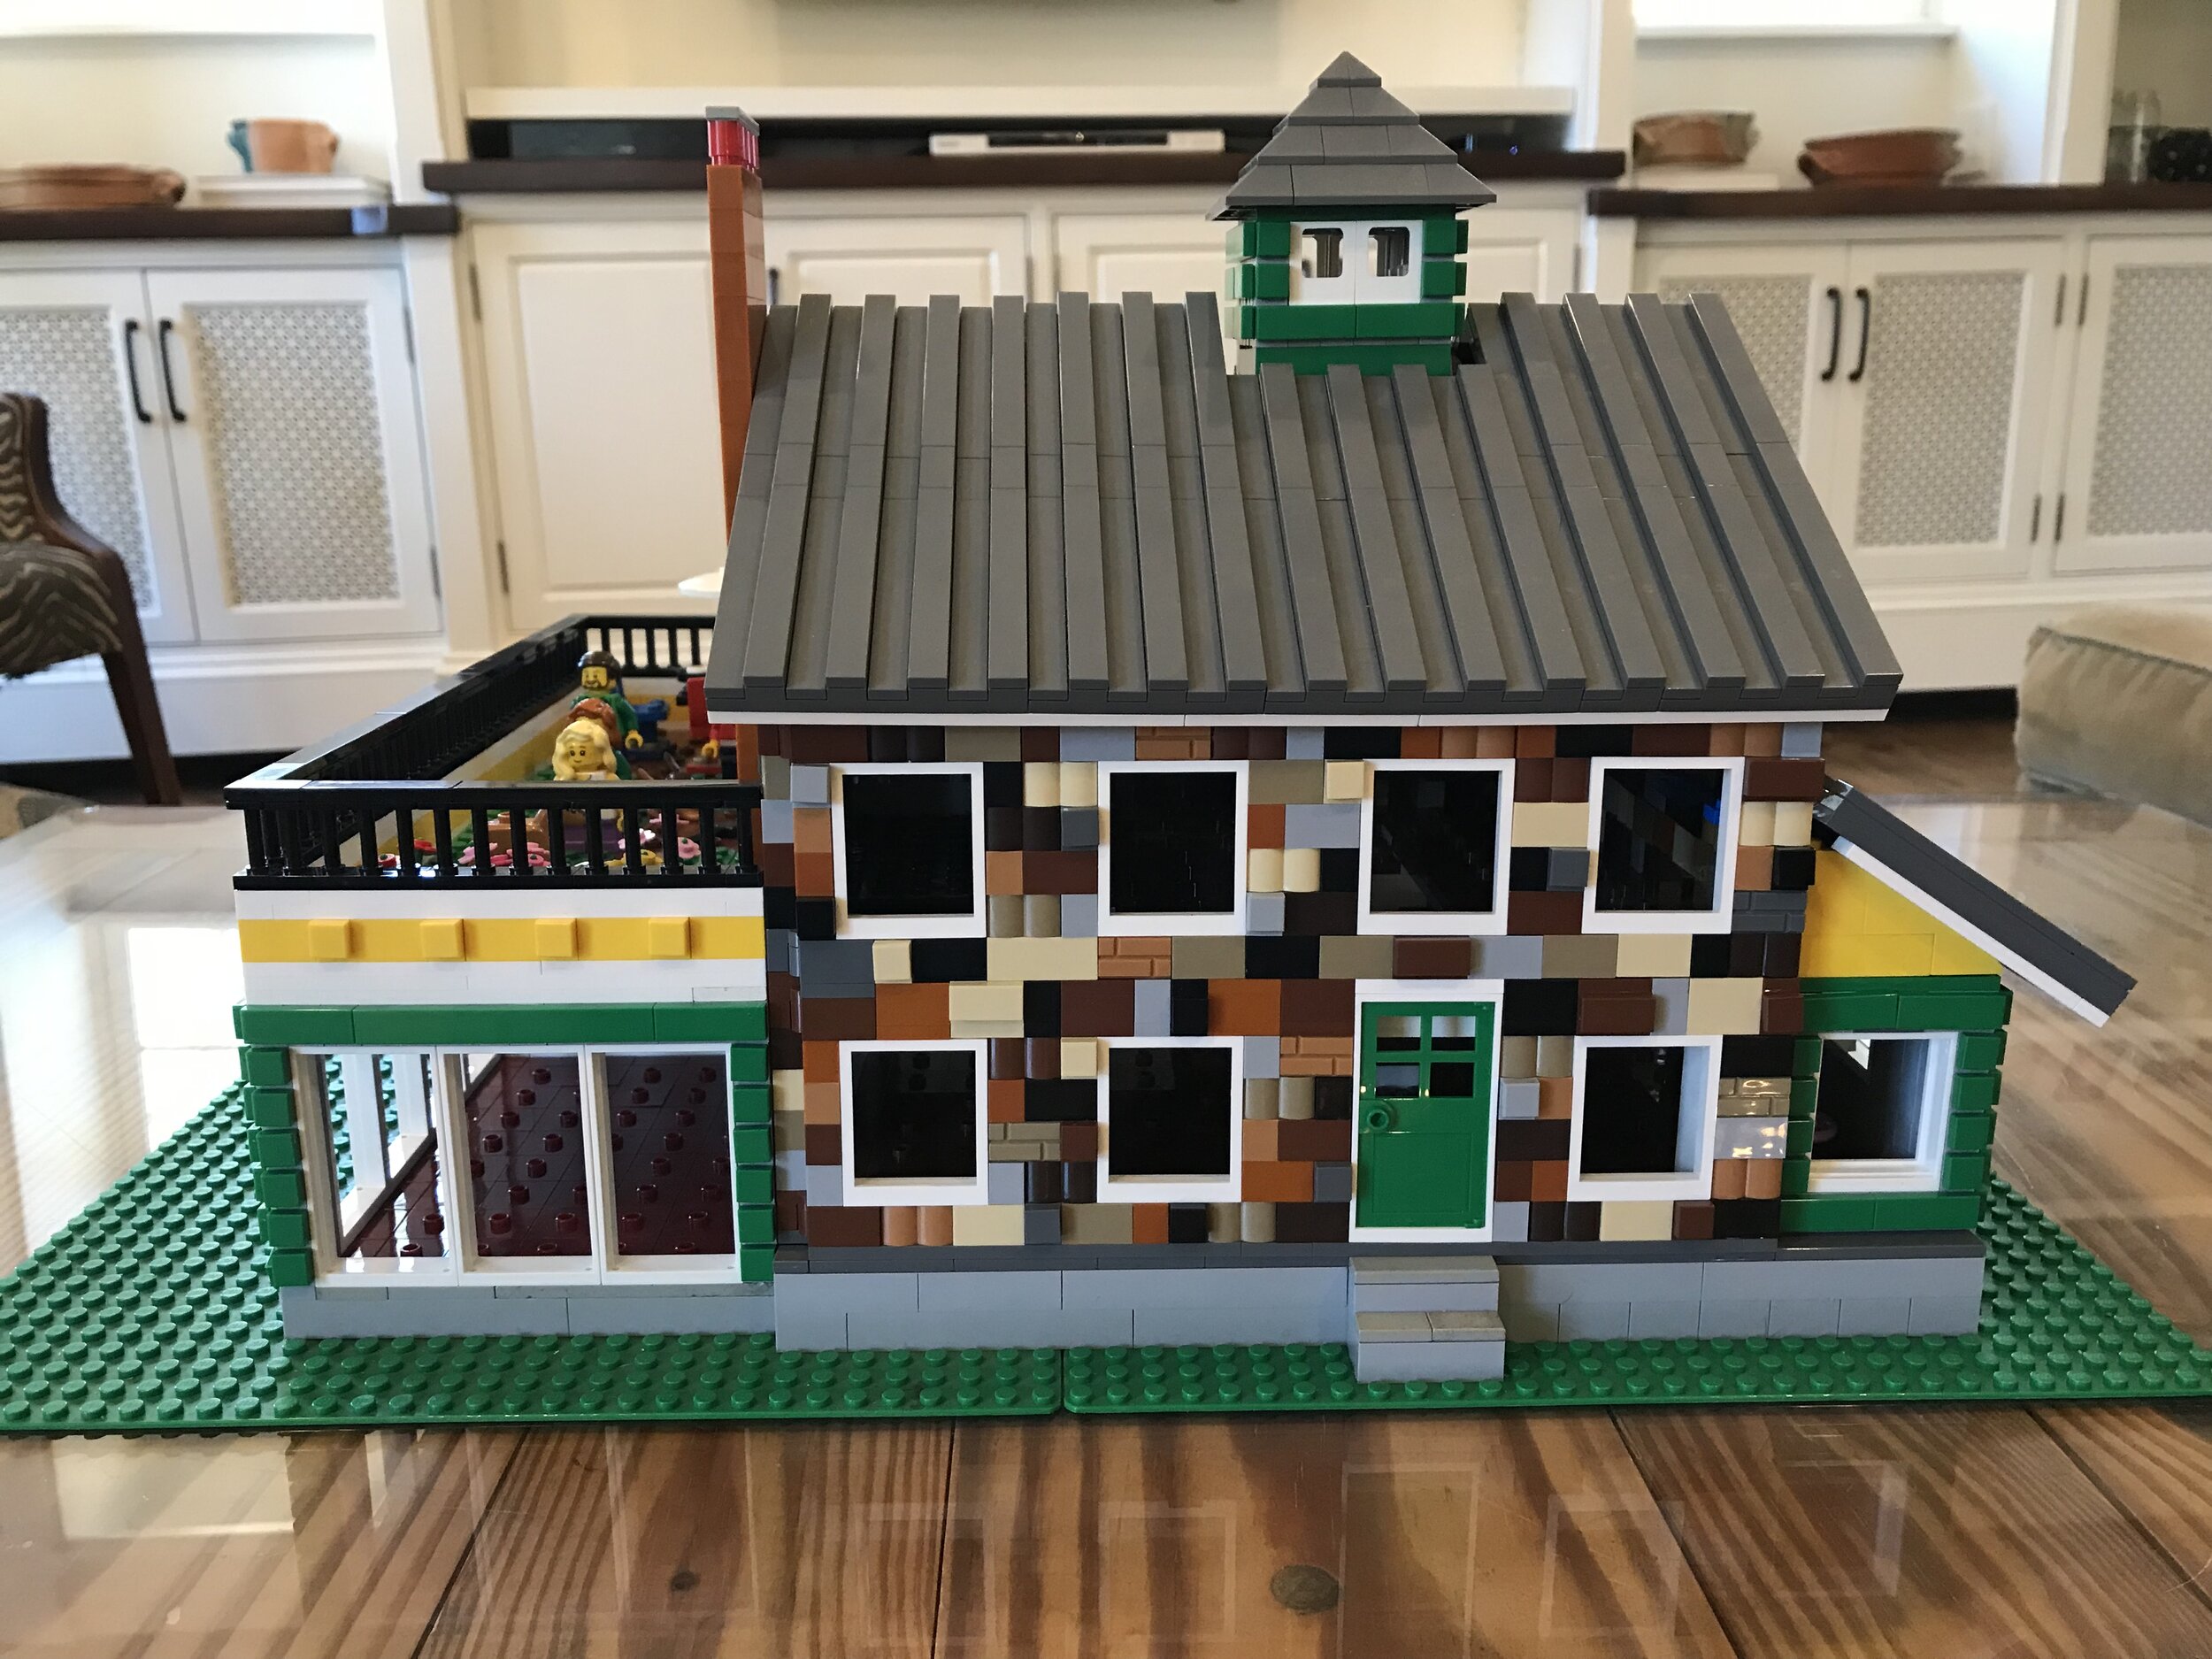  This one is a little different than my normal projects. I’ve been playing with LEGOs since I was a kid, and now my kids are into it too, which is good because it gave me an excuse to create this scale model of our house “for the kids to play with.” 